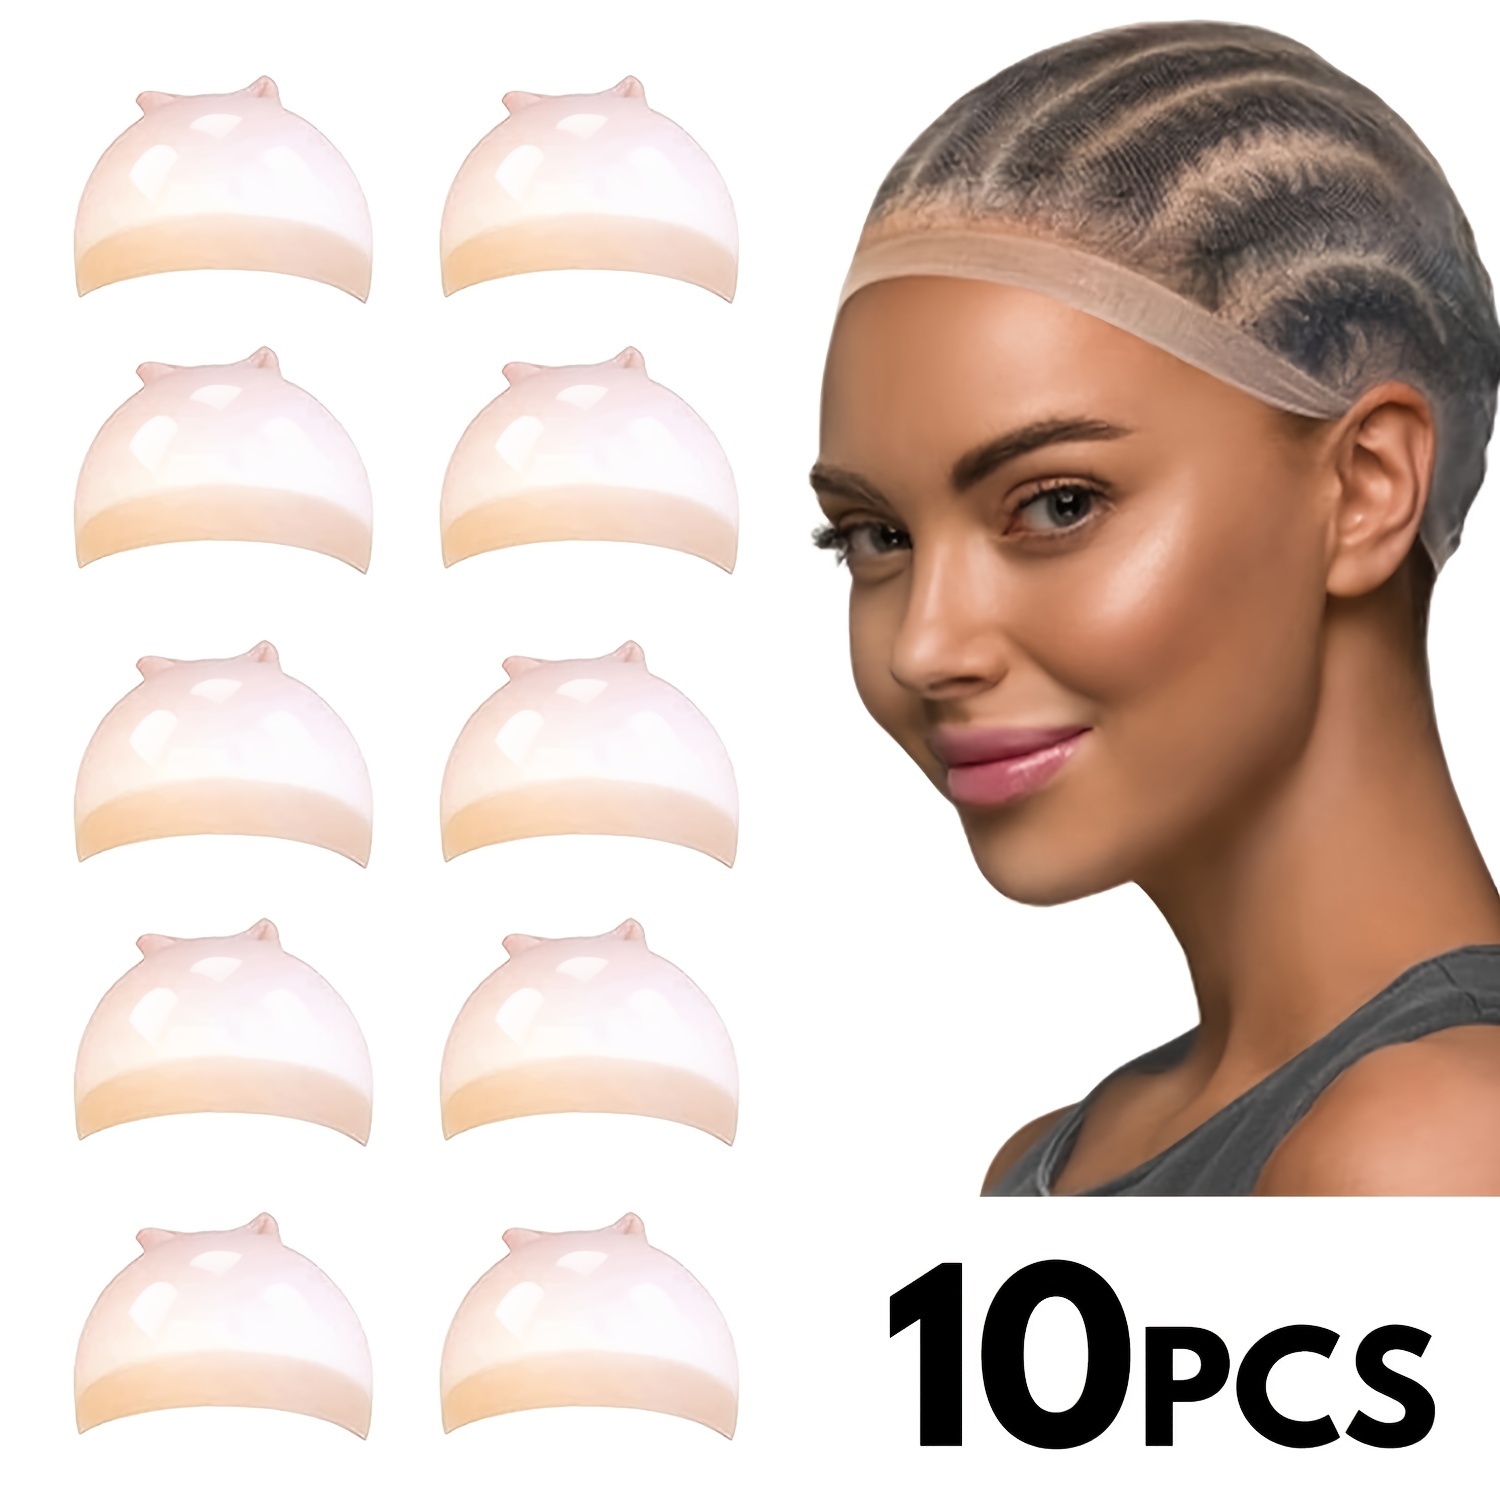 20pcs HD Wig Cap for Lace Front Wig Invisible Wig Cap Bulk Thin Sheer Wig  Caps for Black Women HD Stocking Caps for Wigs Large Wig Supplies for Wig  Install Brown Bald